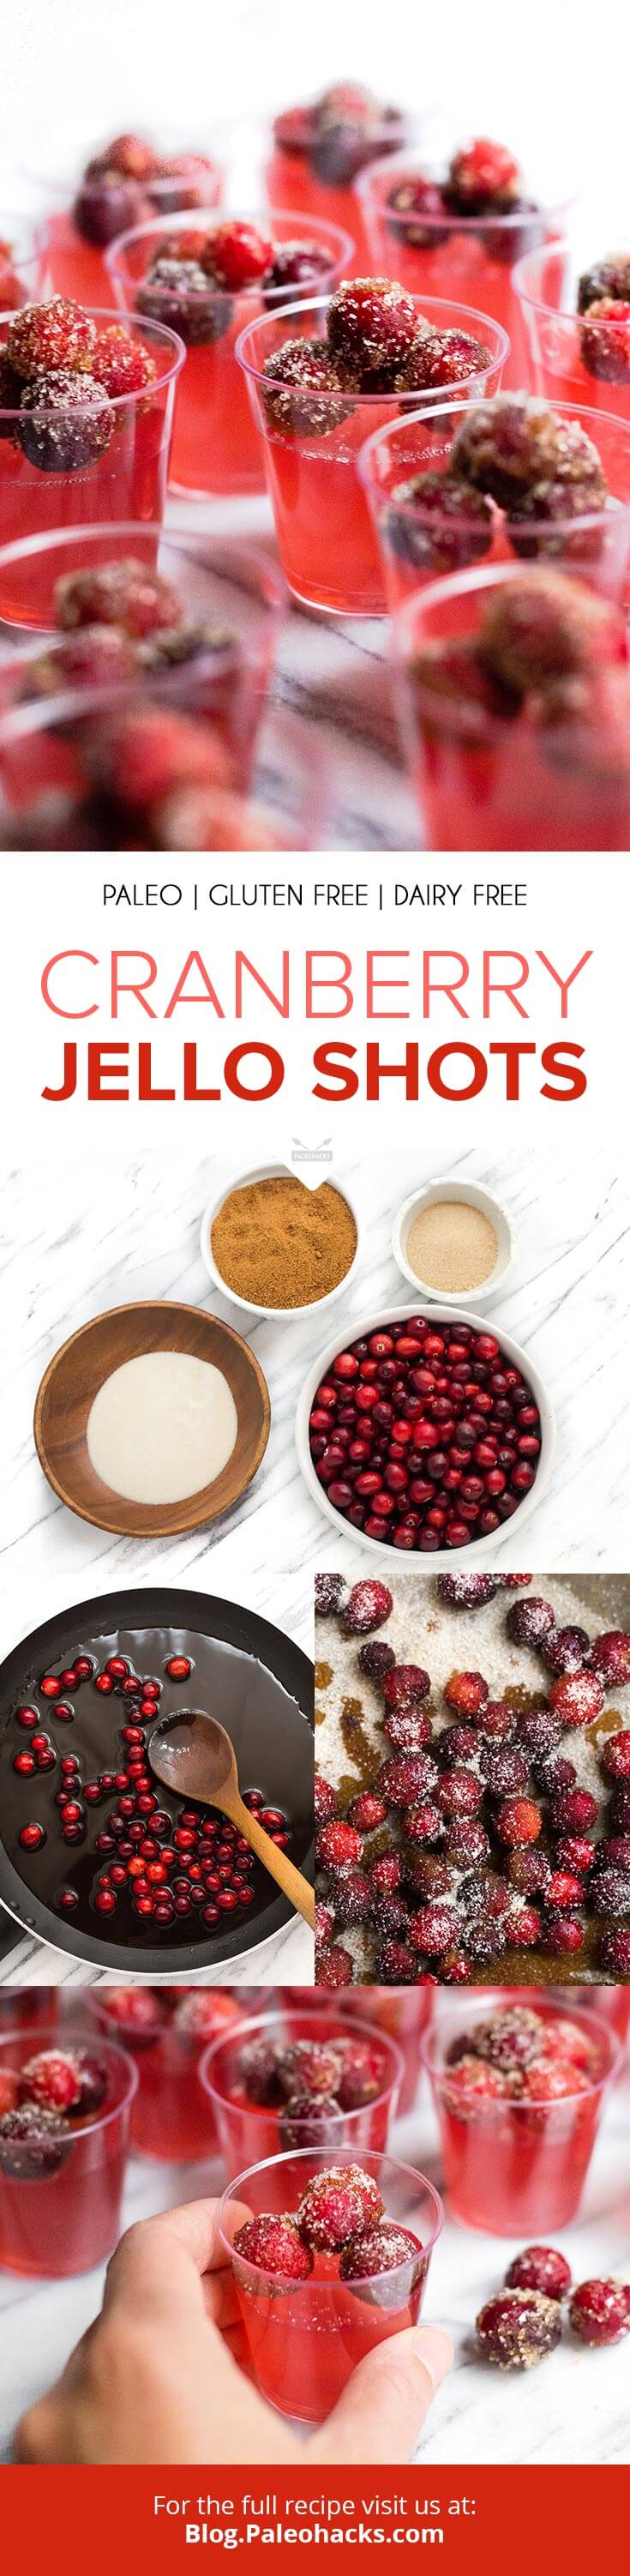 Bring in the holiday cheer with cranberry jello shots flavored with coconut sugar and monk fruit sweetener!